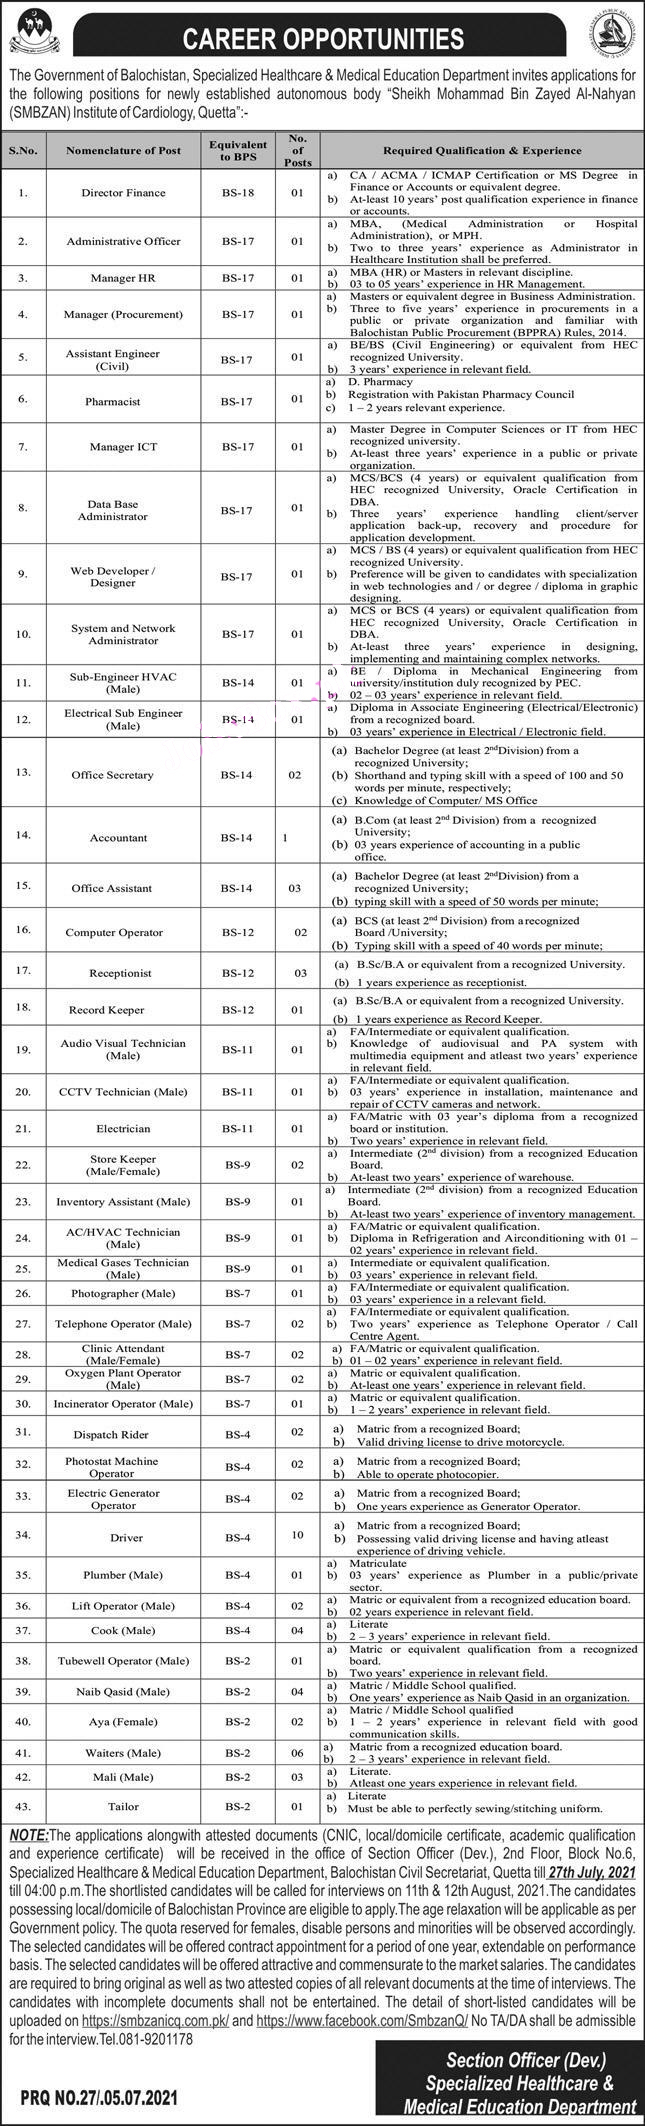 Specialized Healthcare & Medical Department of Education Jobs 2021